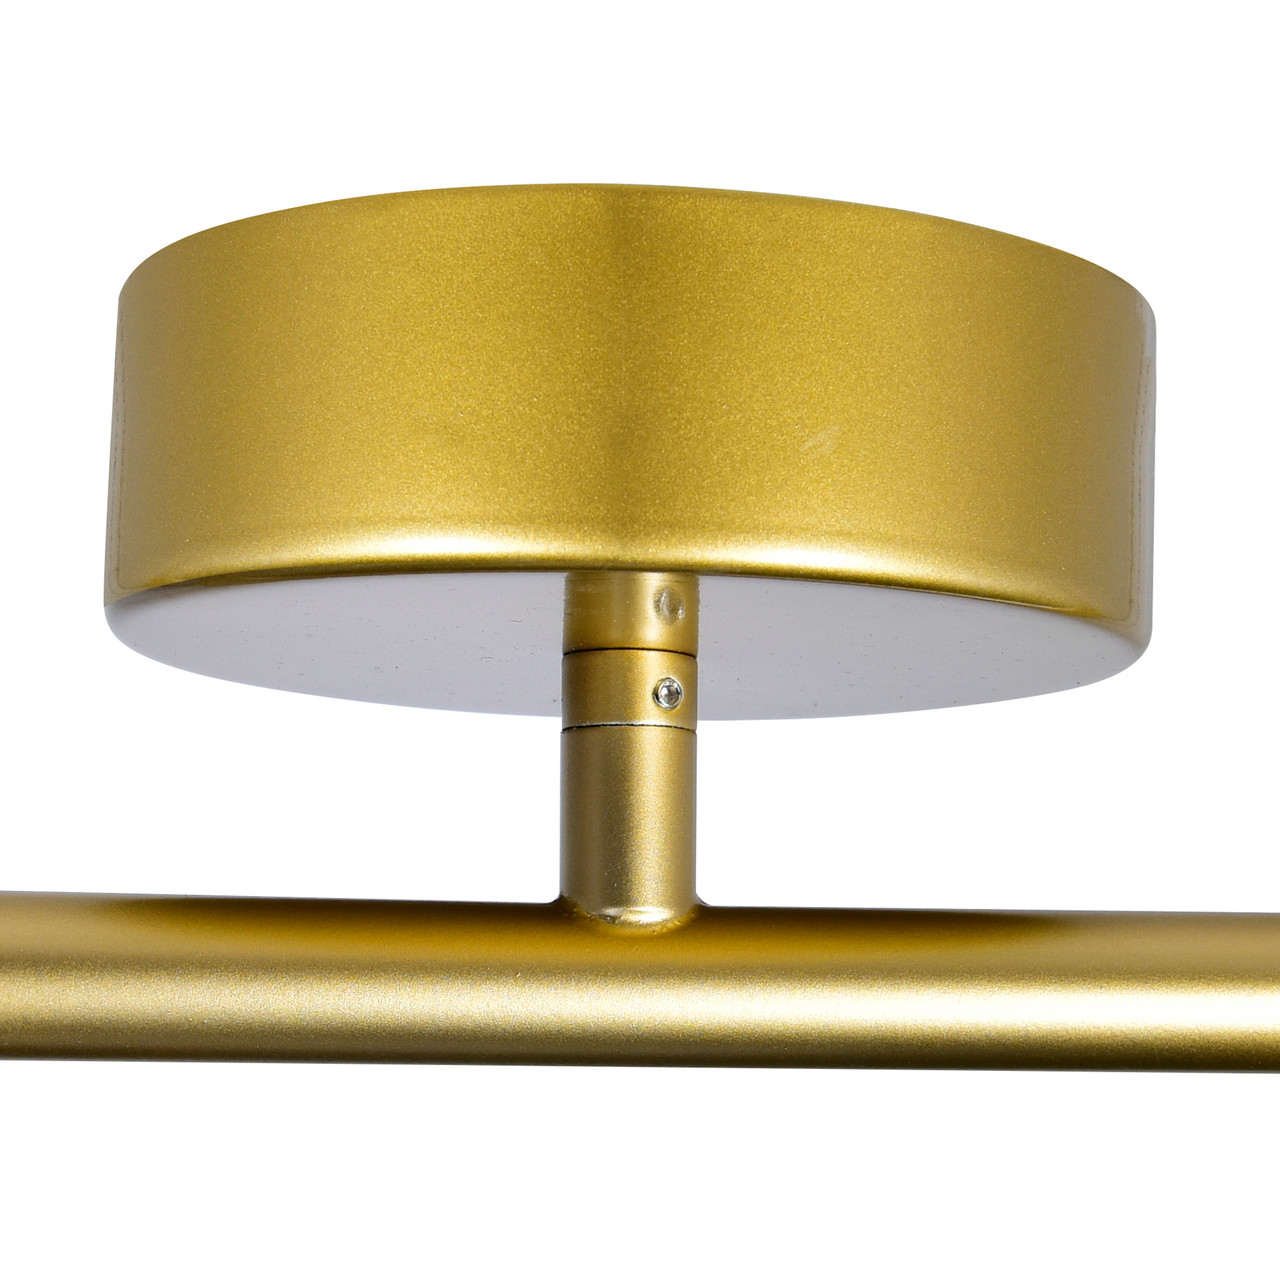 CWI LIGHTING 1375W24-1-602 Oskil LED Integrated Wall Light With Satin Gold Finish